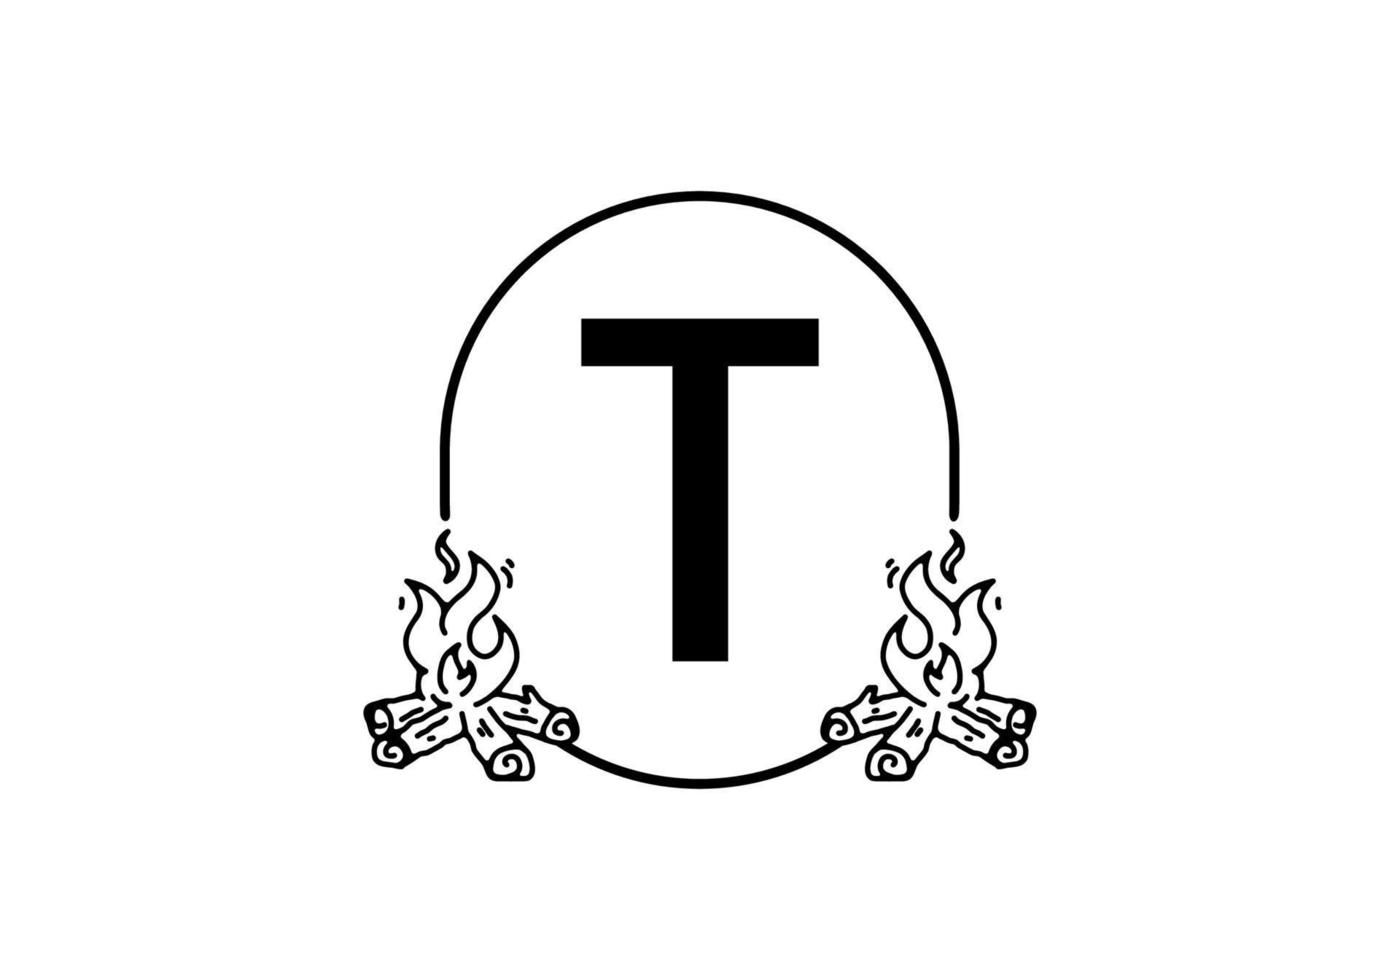 Black line art of bonfire with T initial letter vector